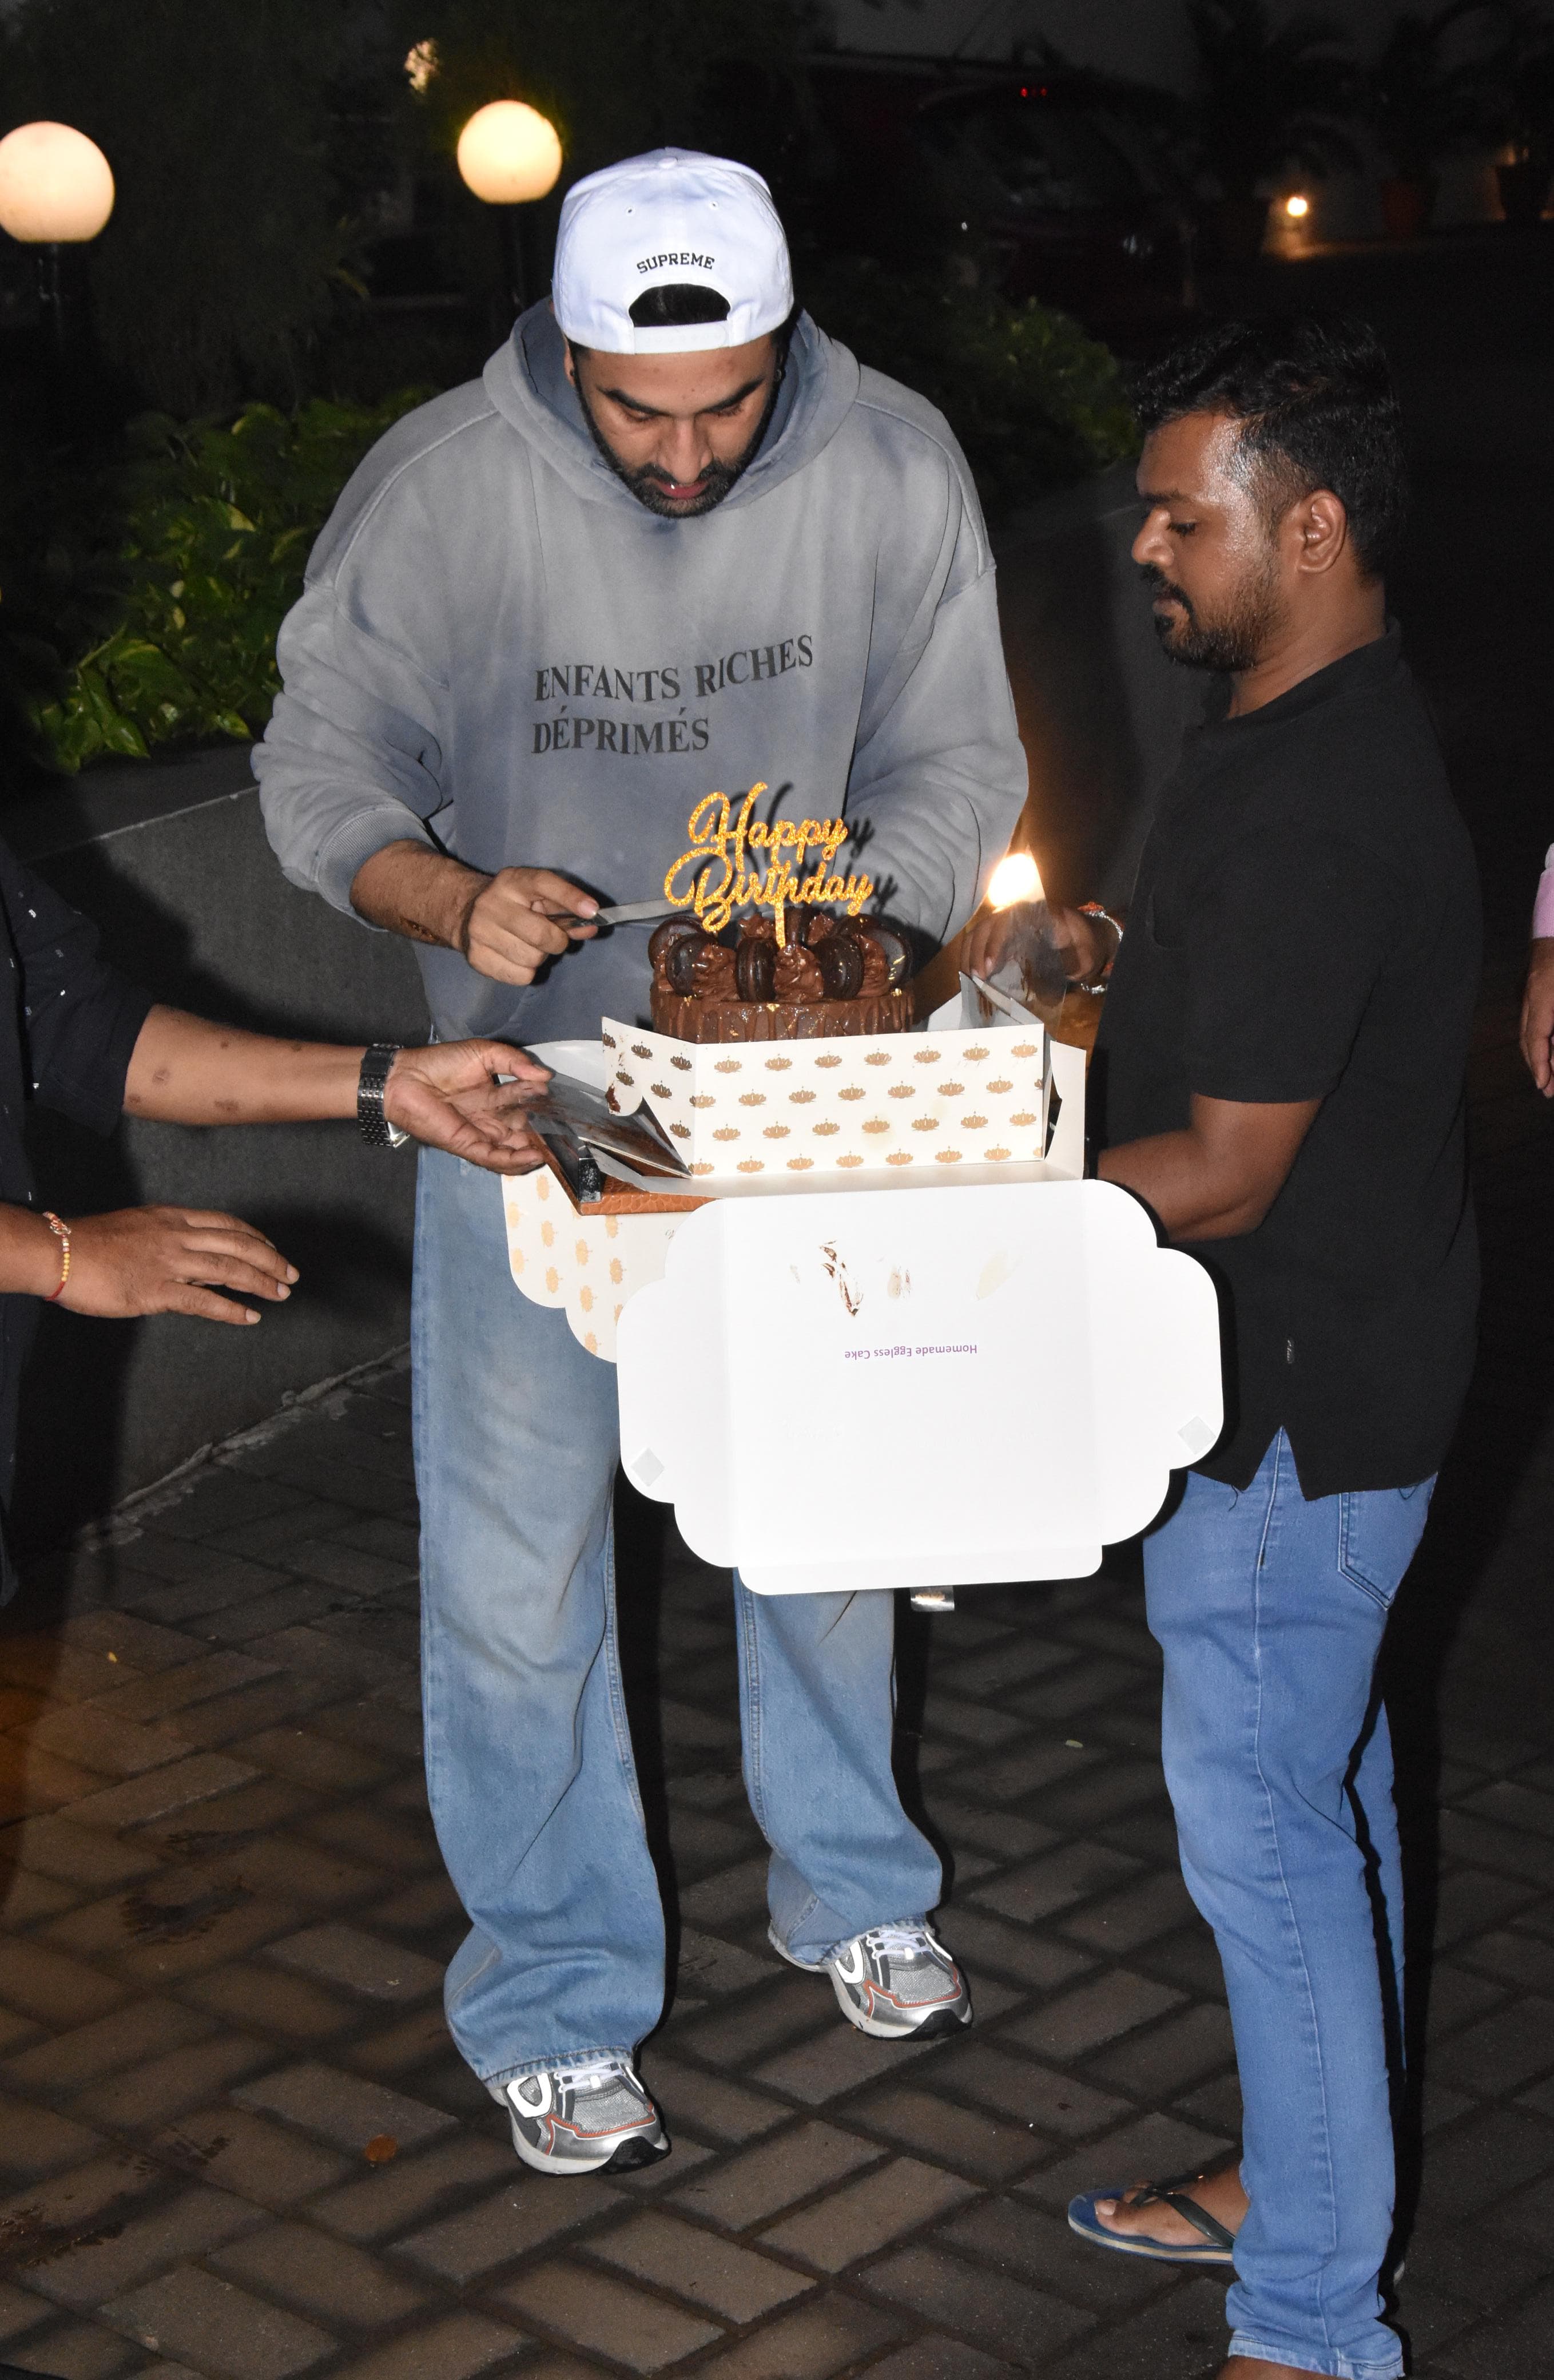  The actor generously shared the joy by cutting the cake amidst cheers and applause from the ecstatic crowd.